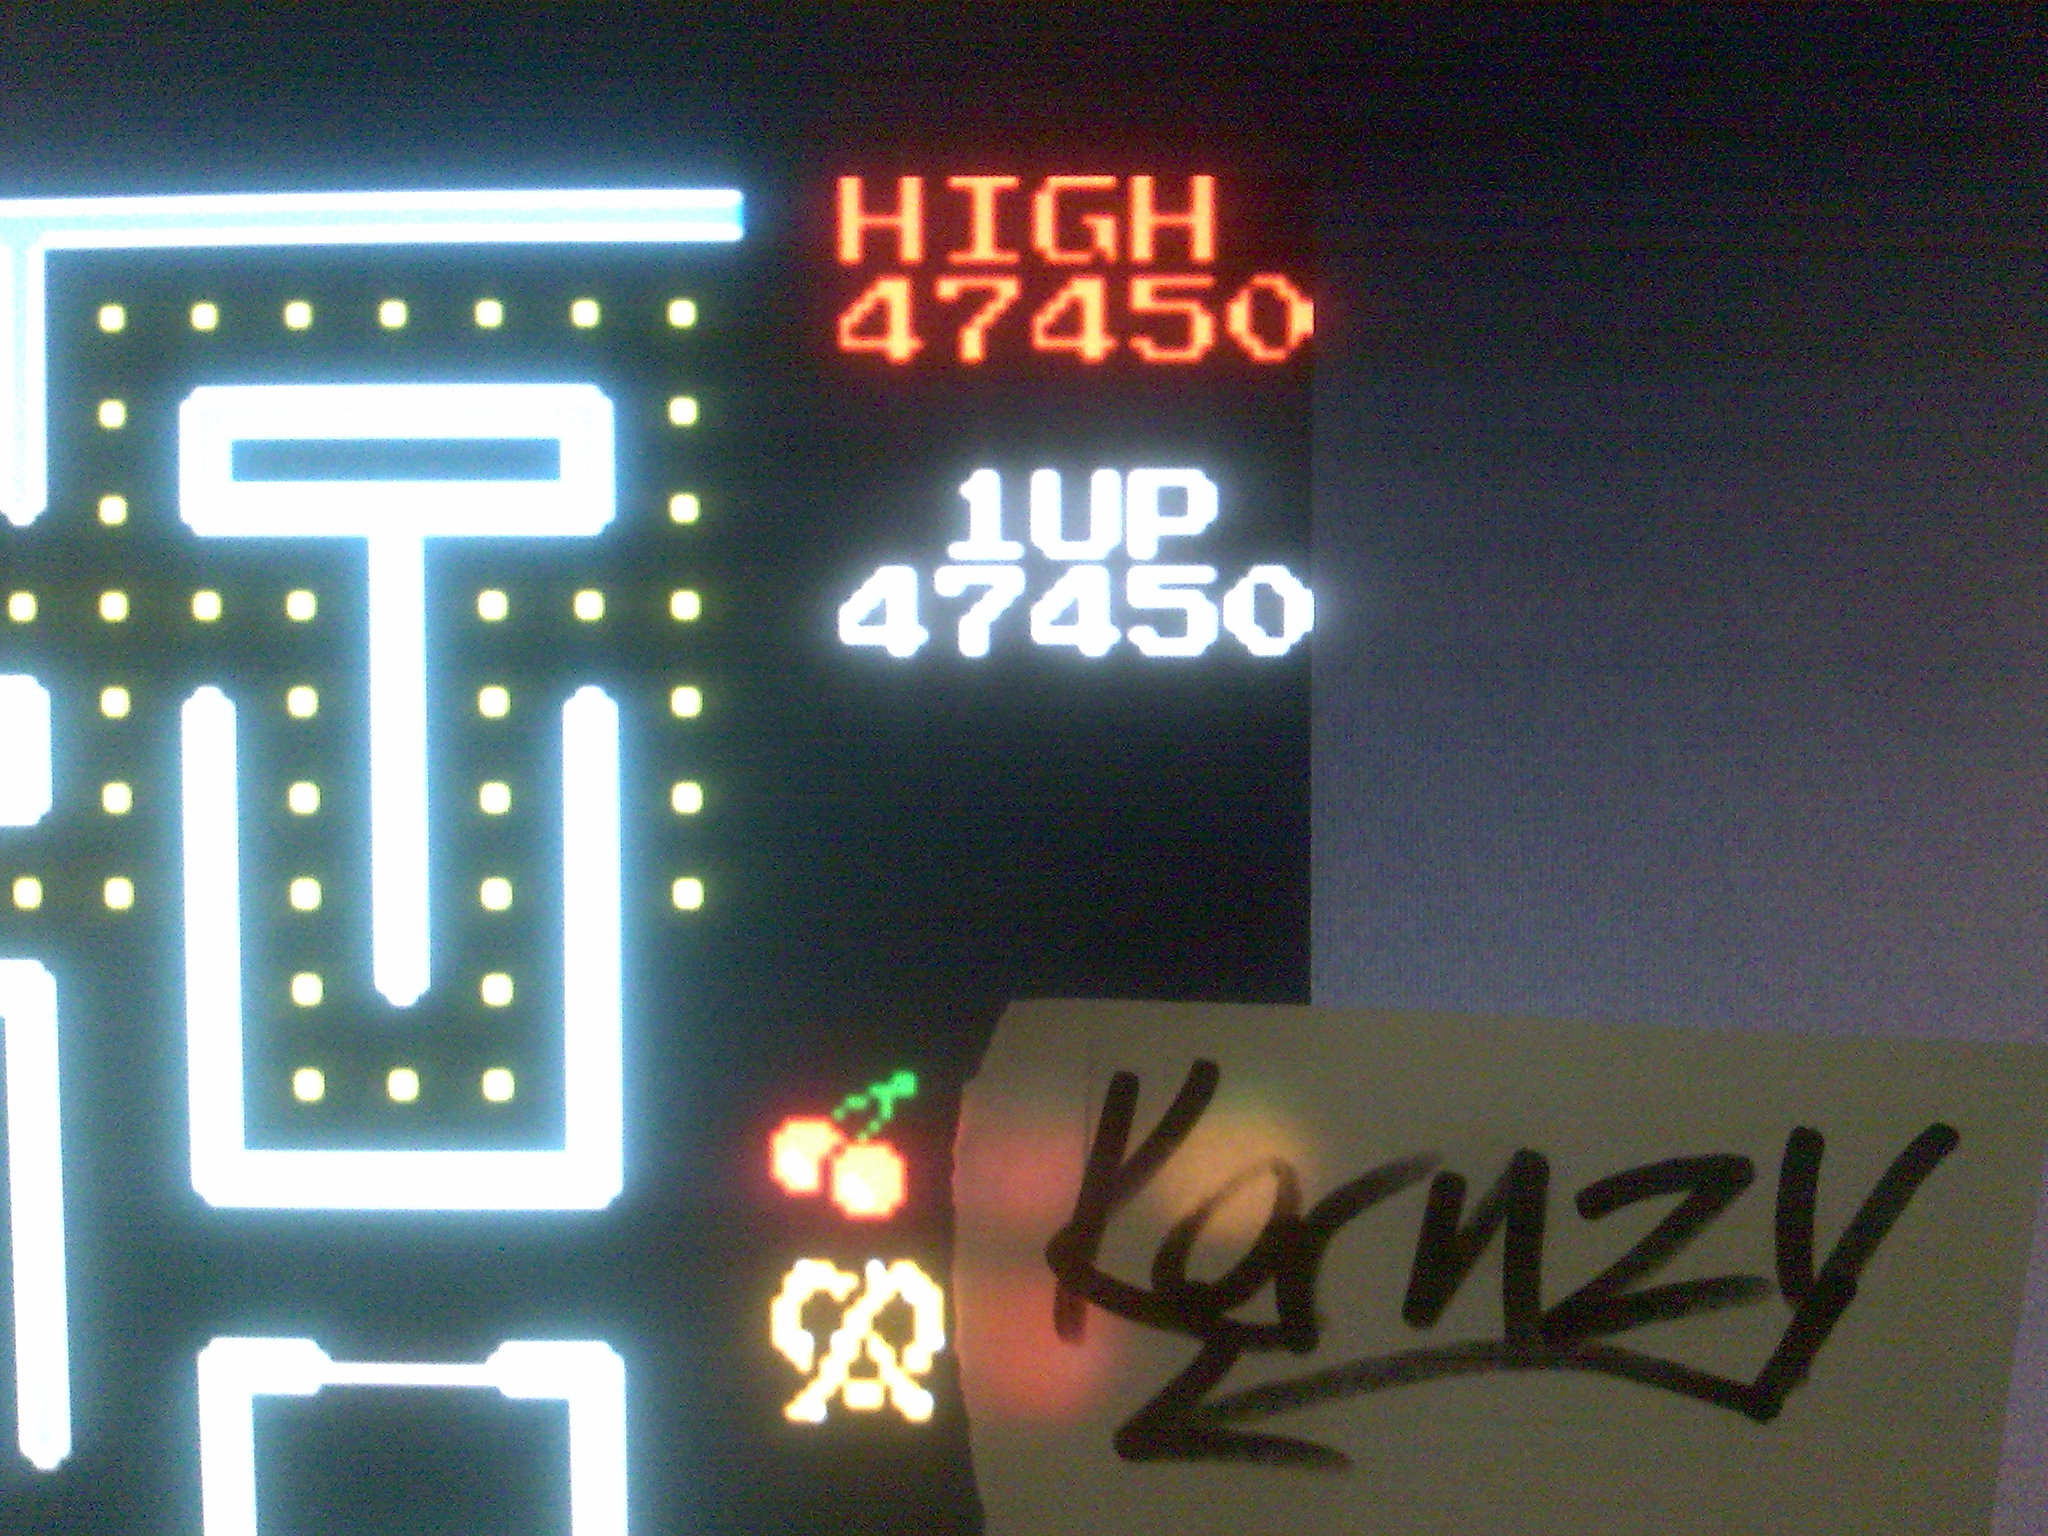 Ms. Pac-Man 47,450 points